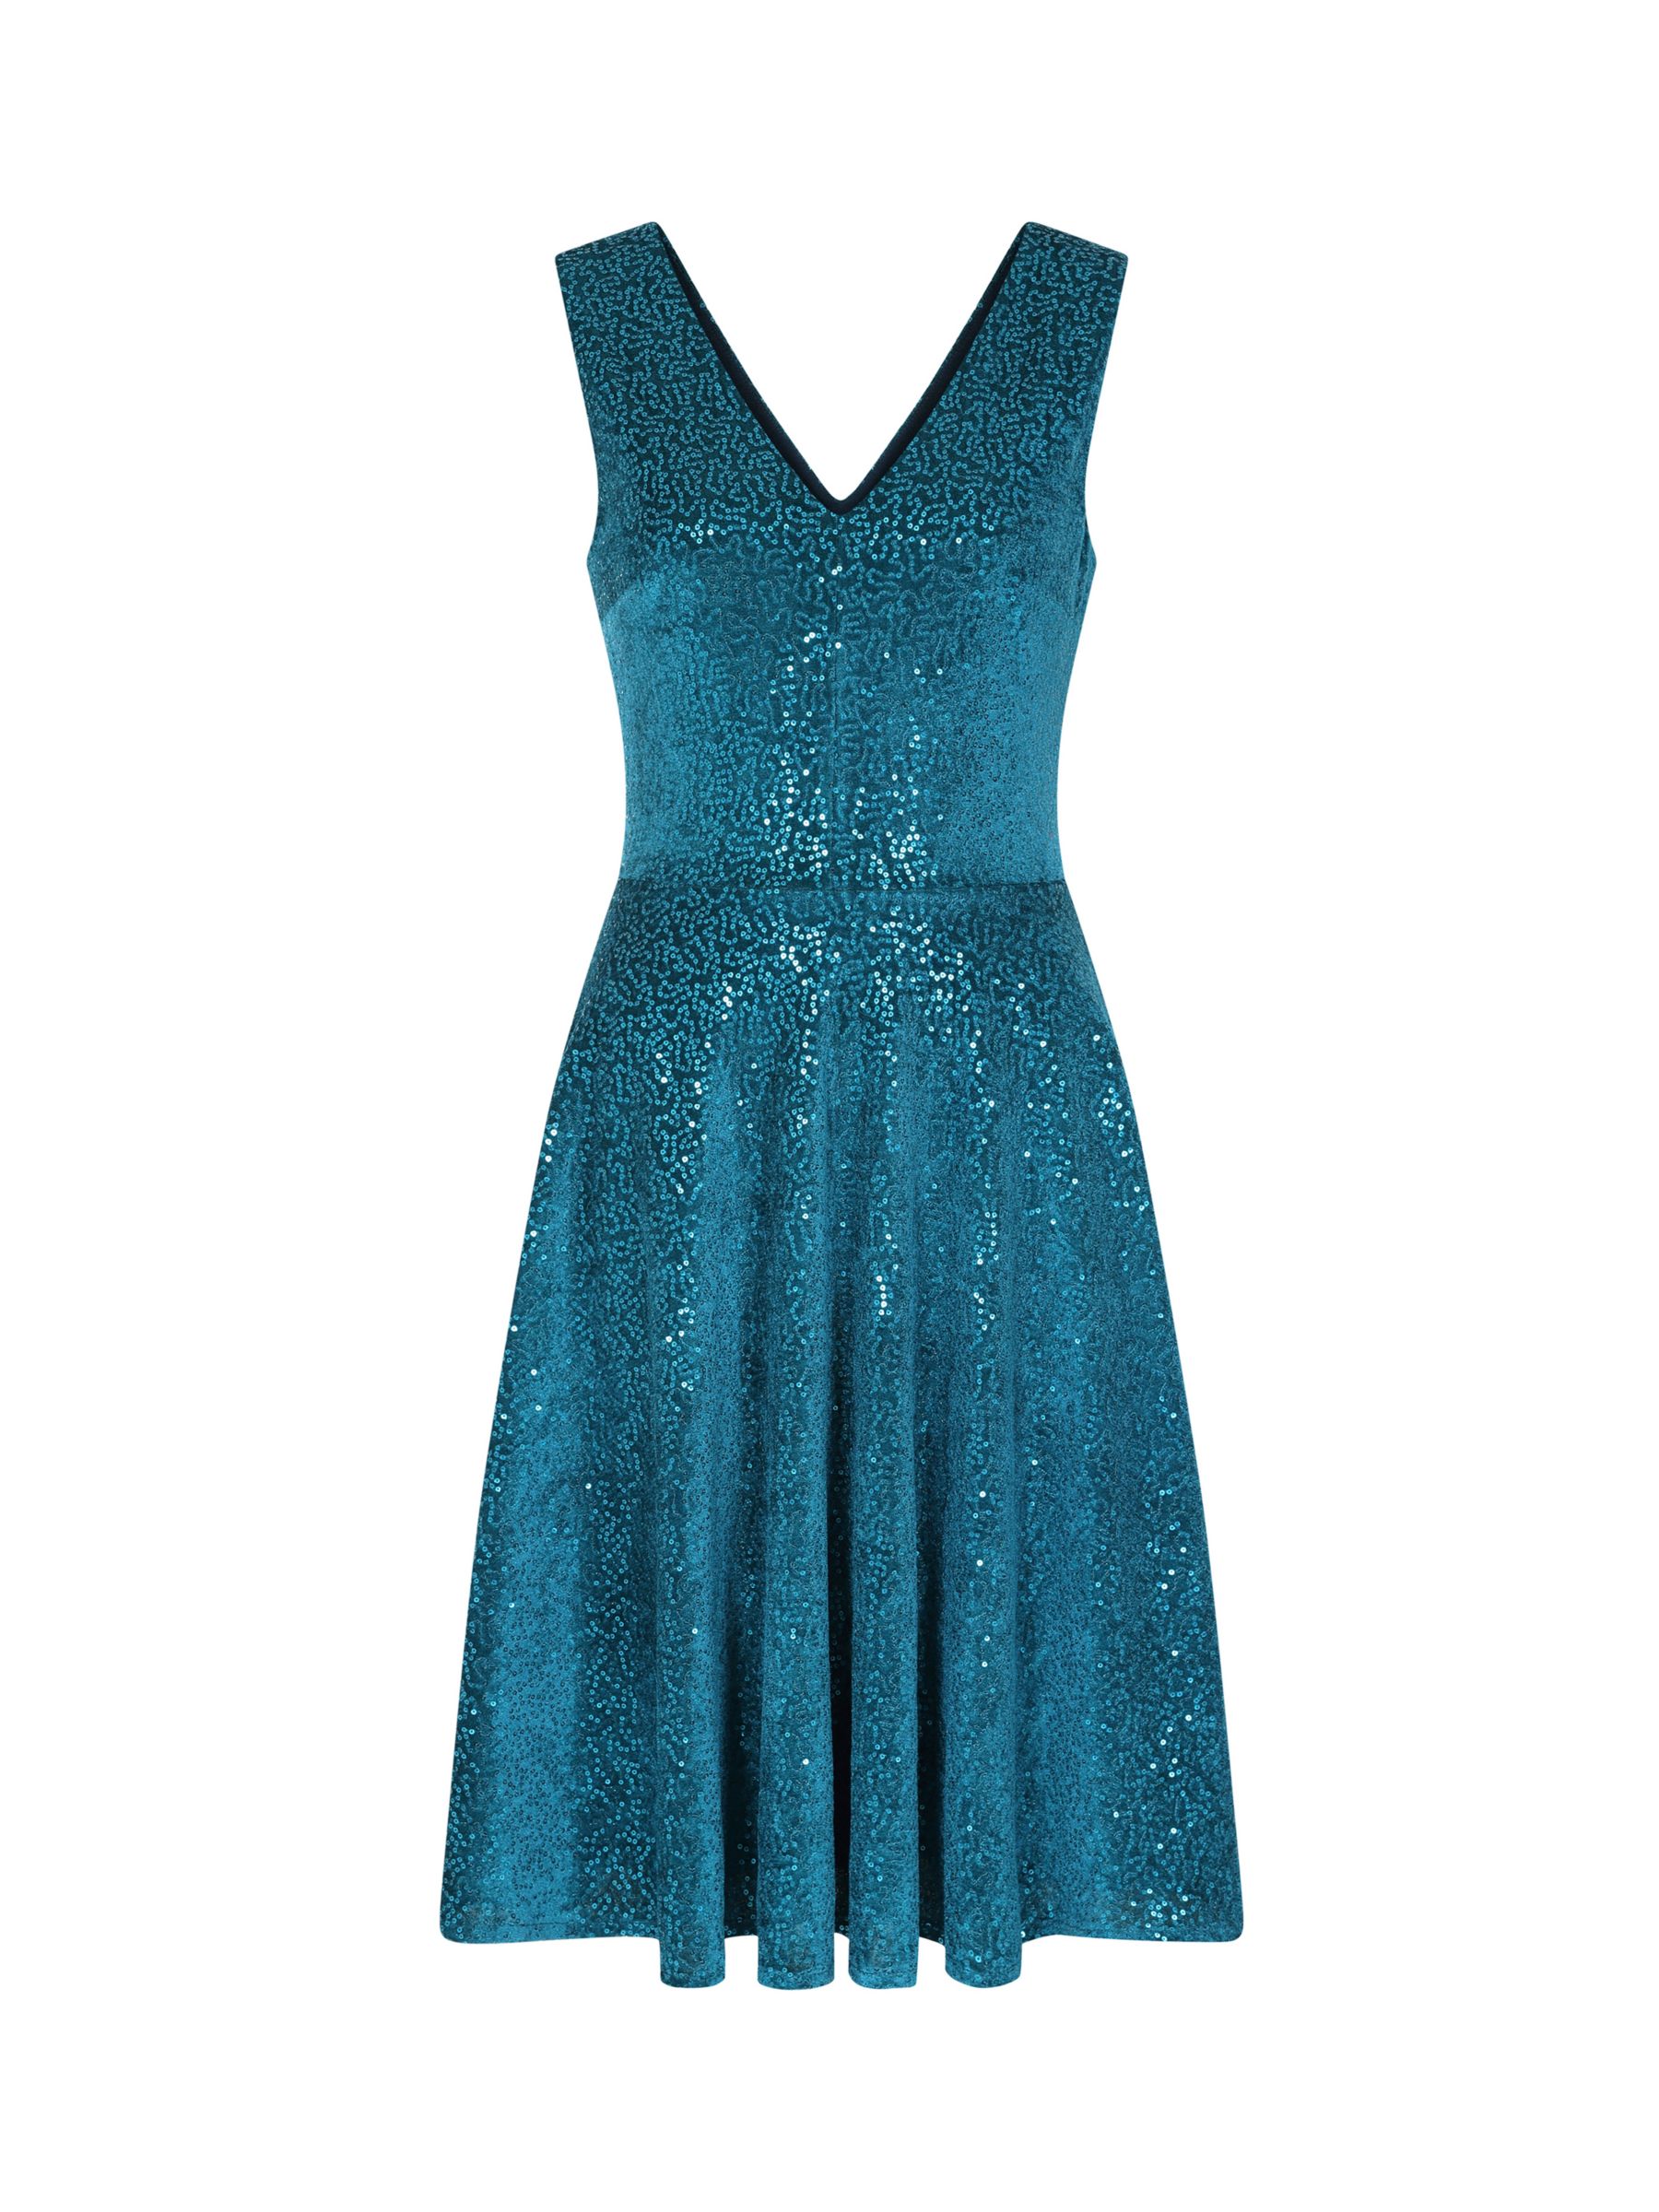 HotSquash Velvet Sequin Fit and Flare Dress, Turquoise, 8